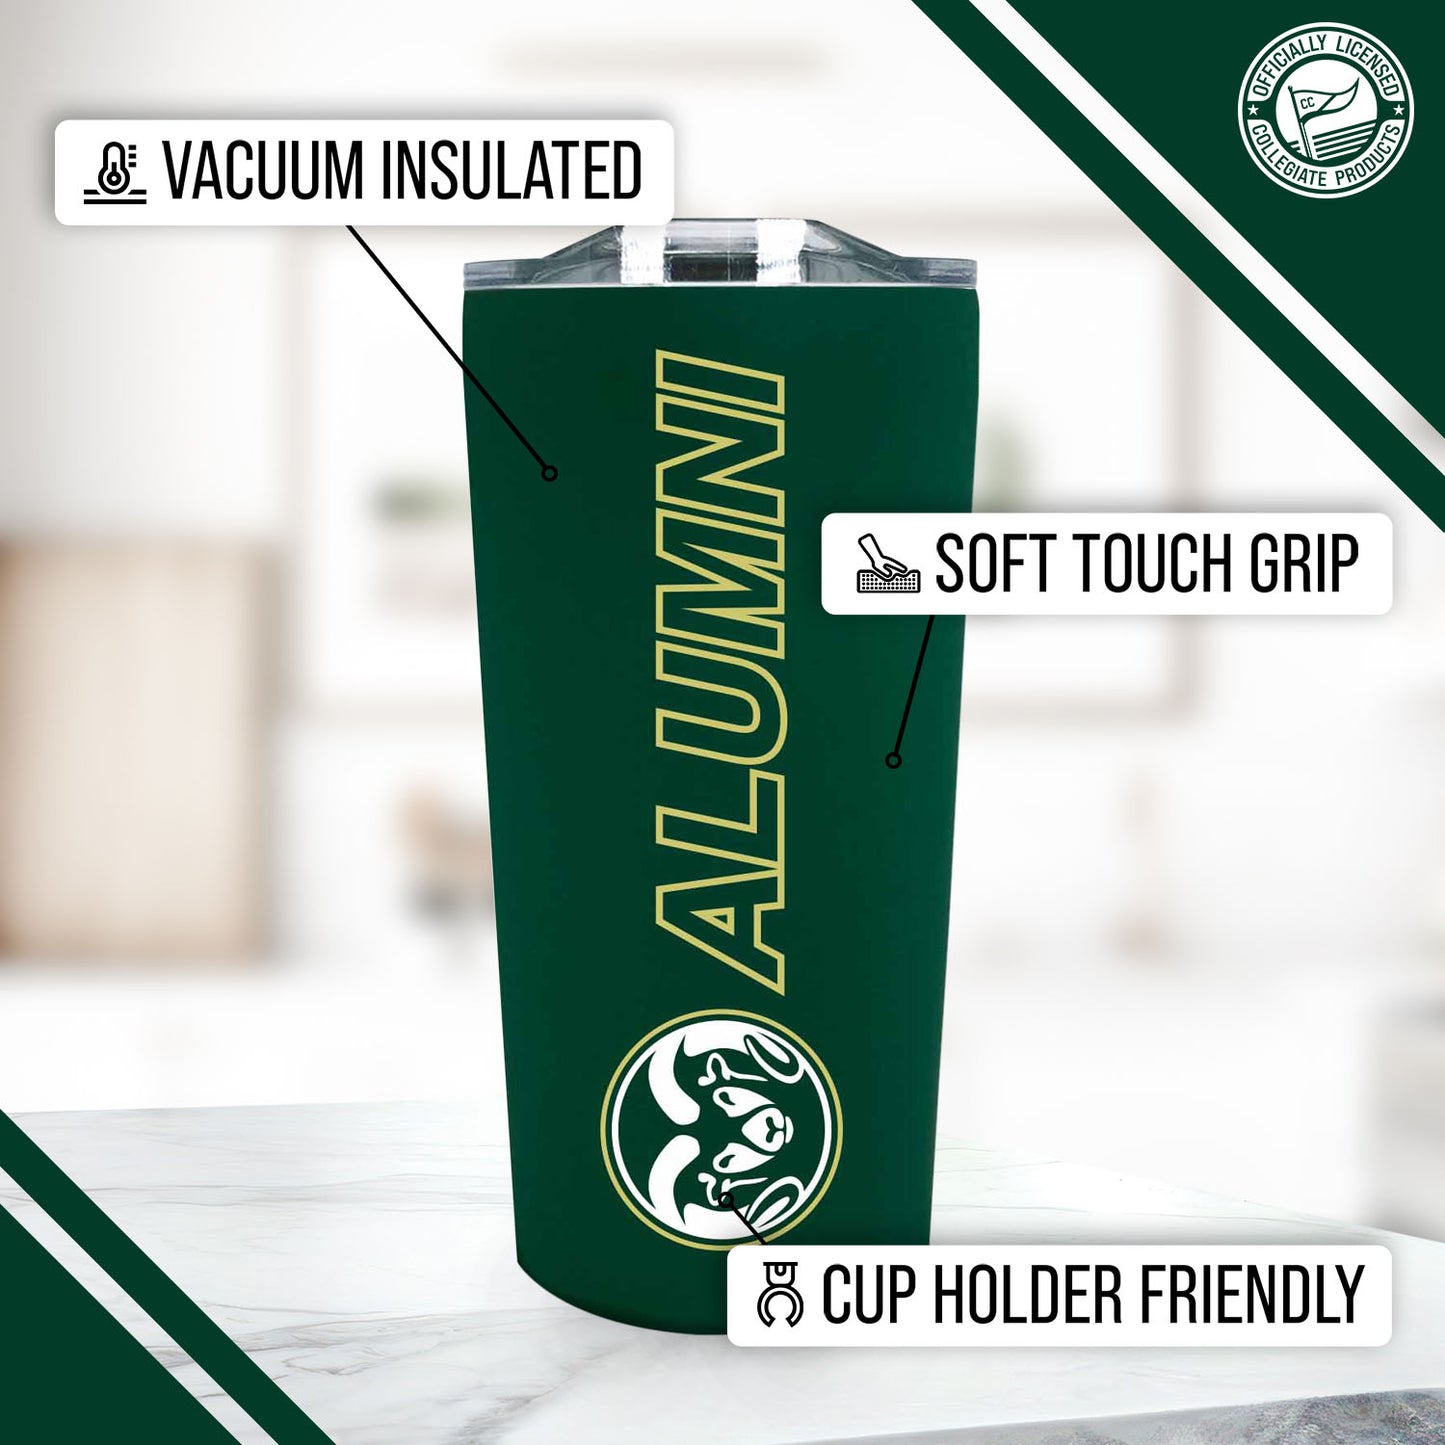 Colorado State Rams NCAA Stainless Steel Travel Tumbler for Alumni - Green